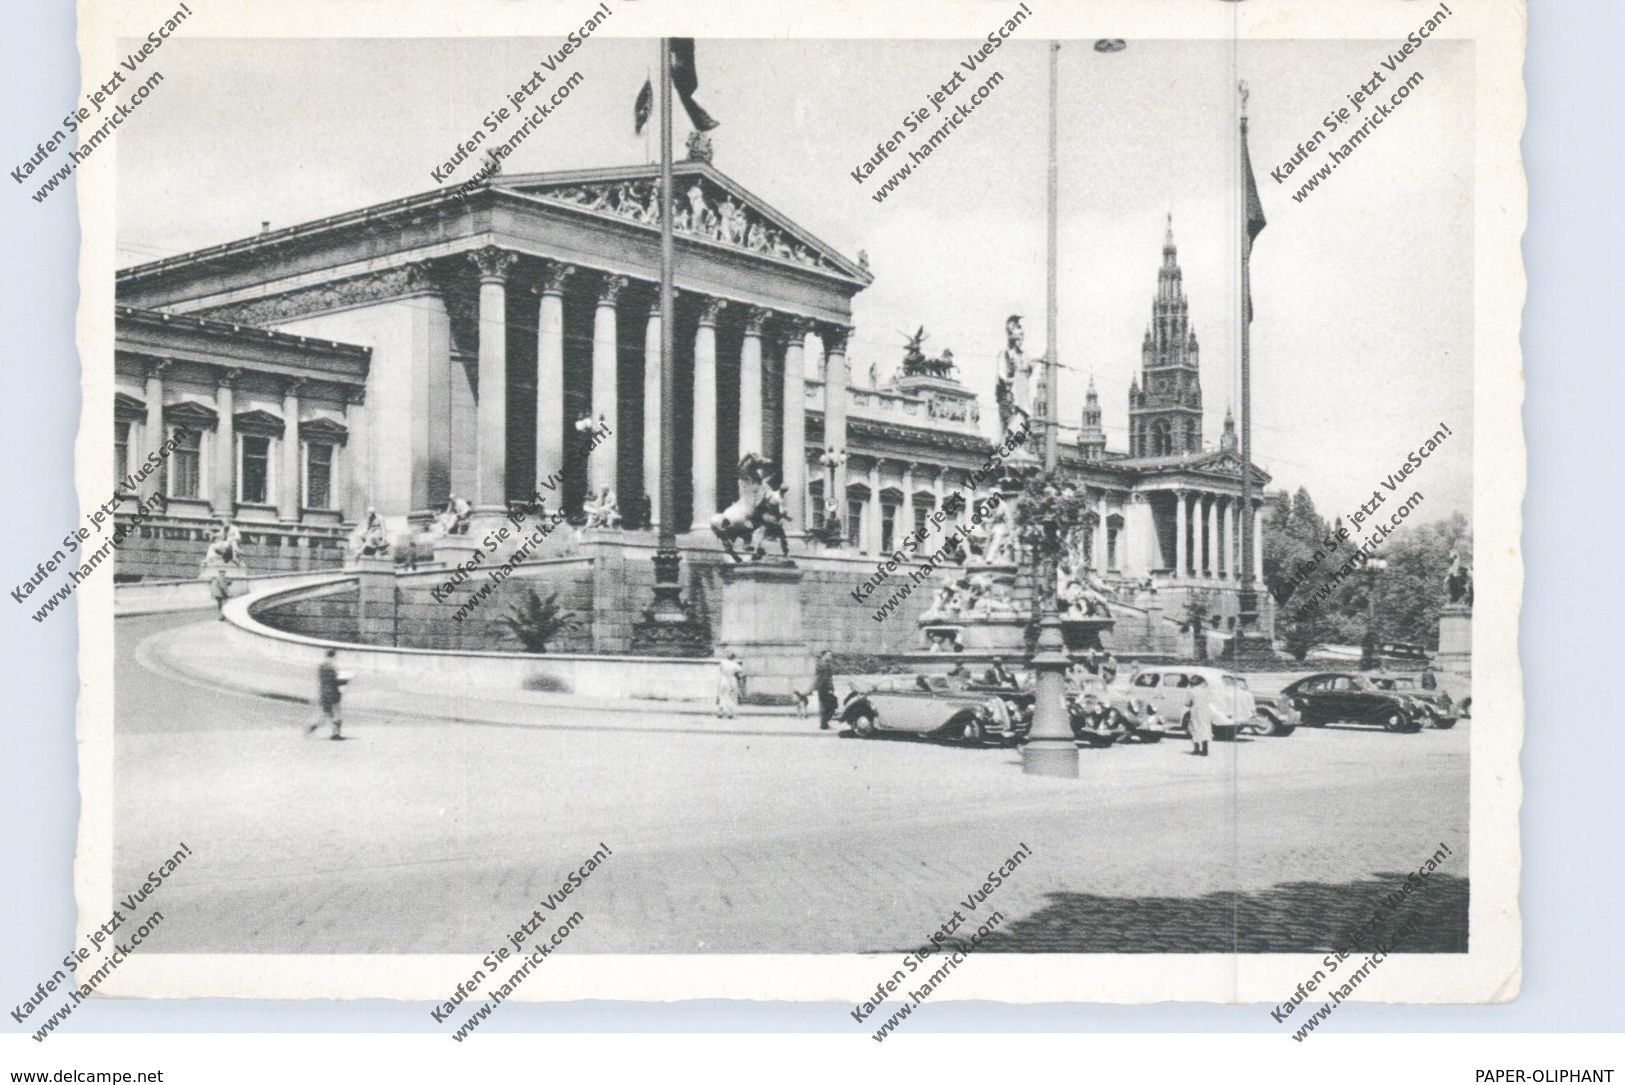 A 1000 WIEN, Parlament, 1941, NS-Beflaggung, Auto - Oldtimer - Ringstrasse